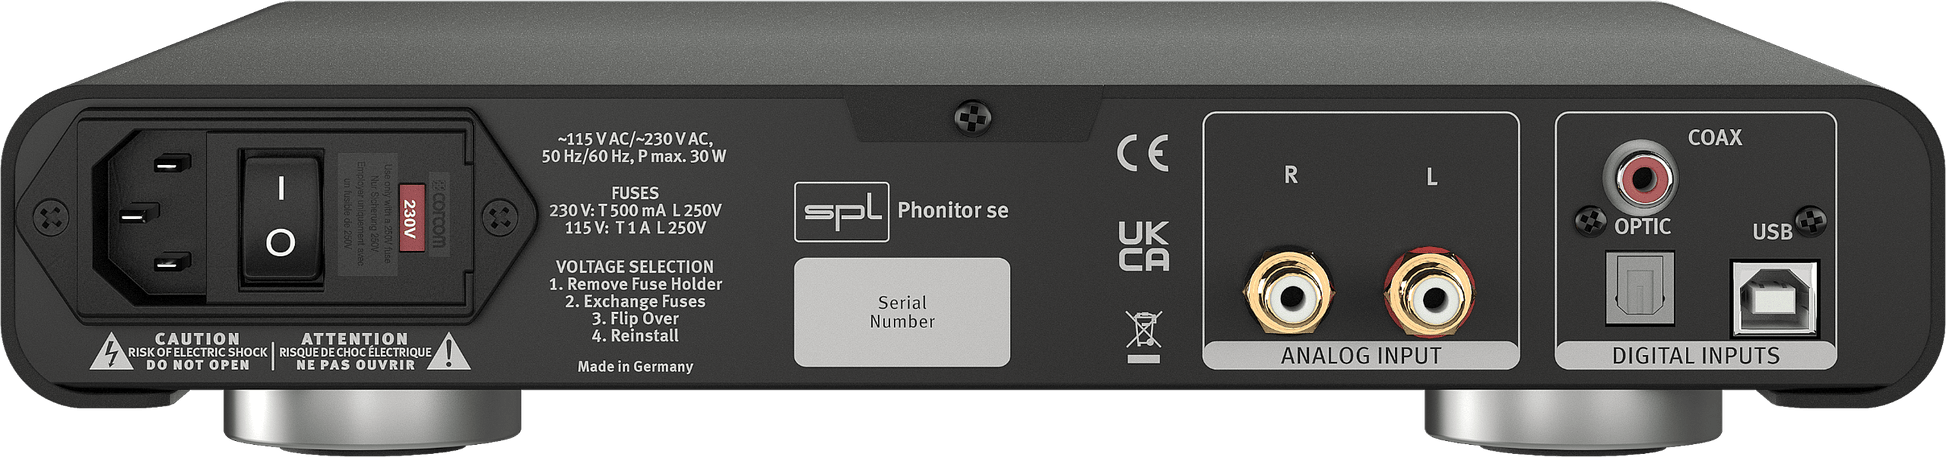 SPL Audio Phonitor se Headphone Amplifier with optional DAC 768xs. Image shows rear of option with DAC 768xs